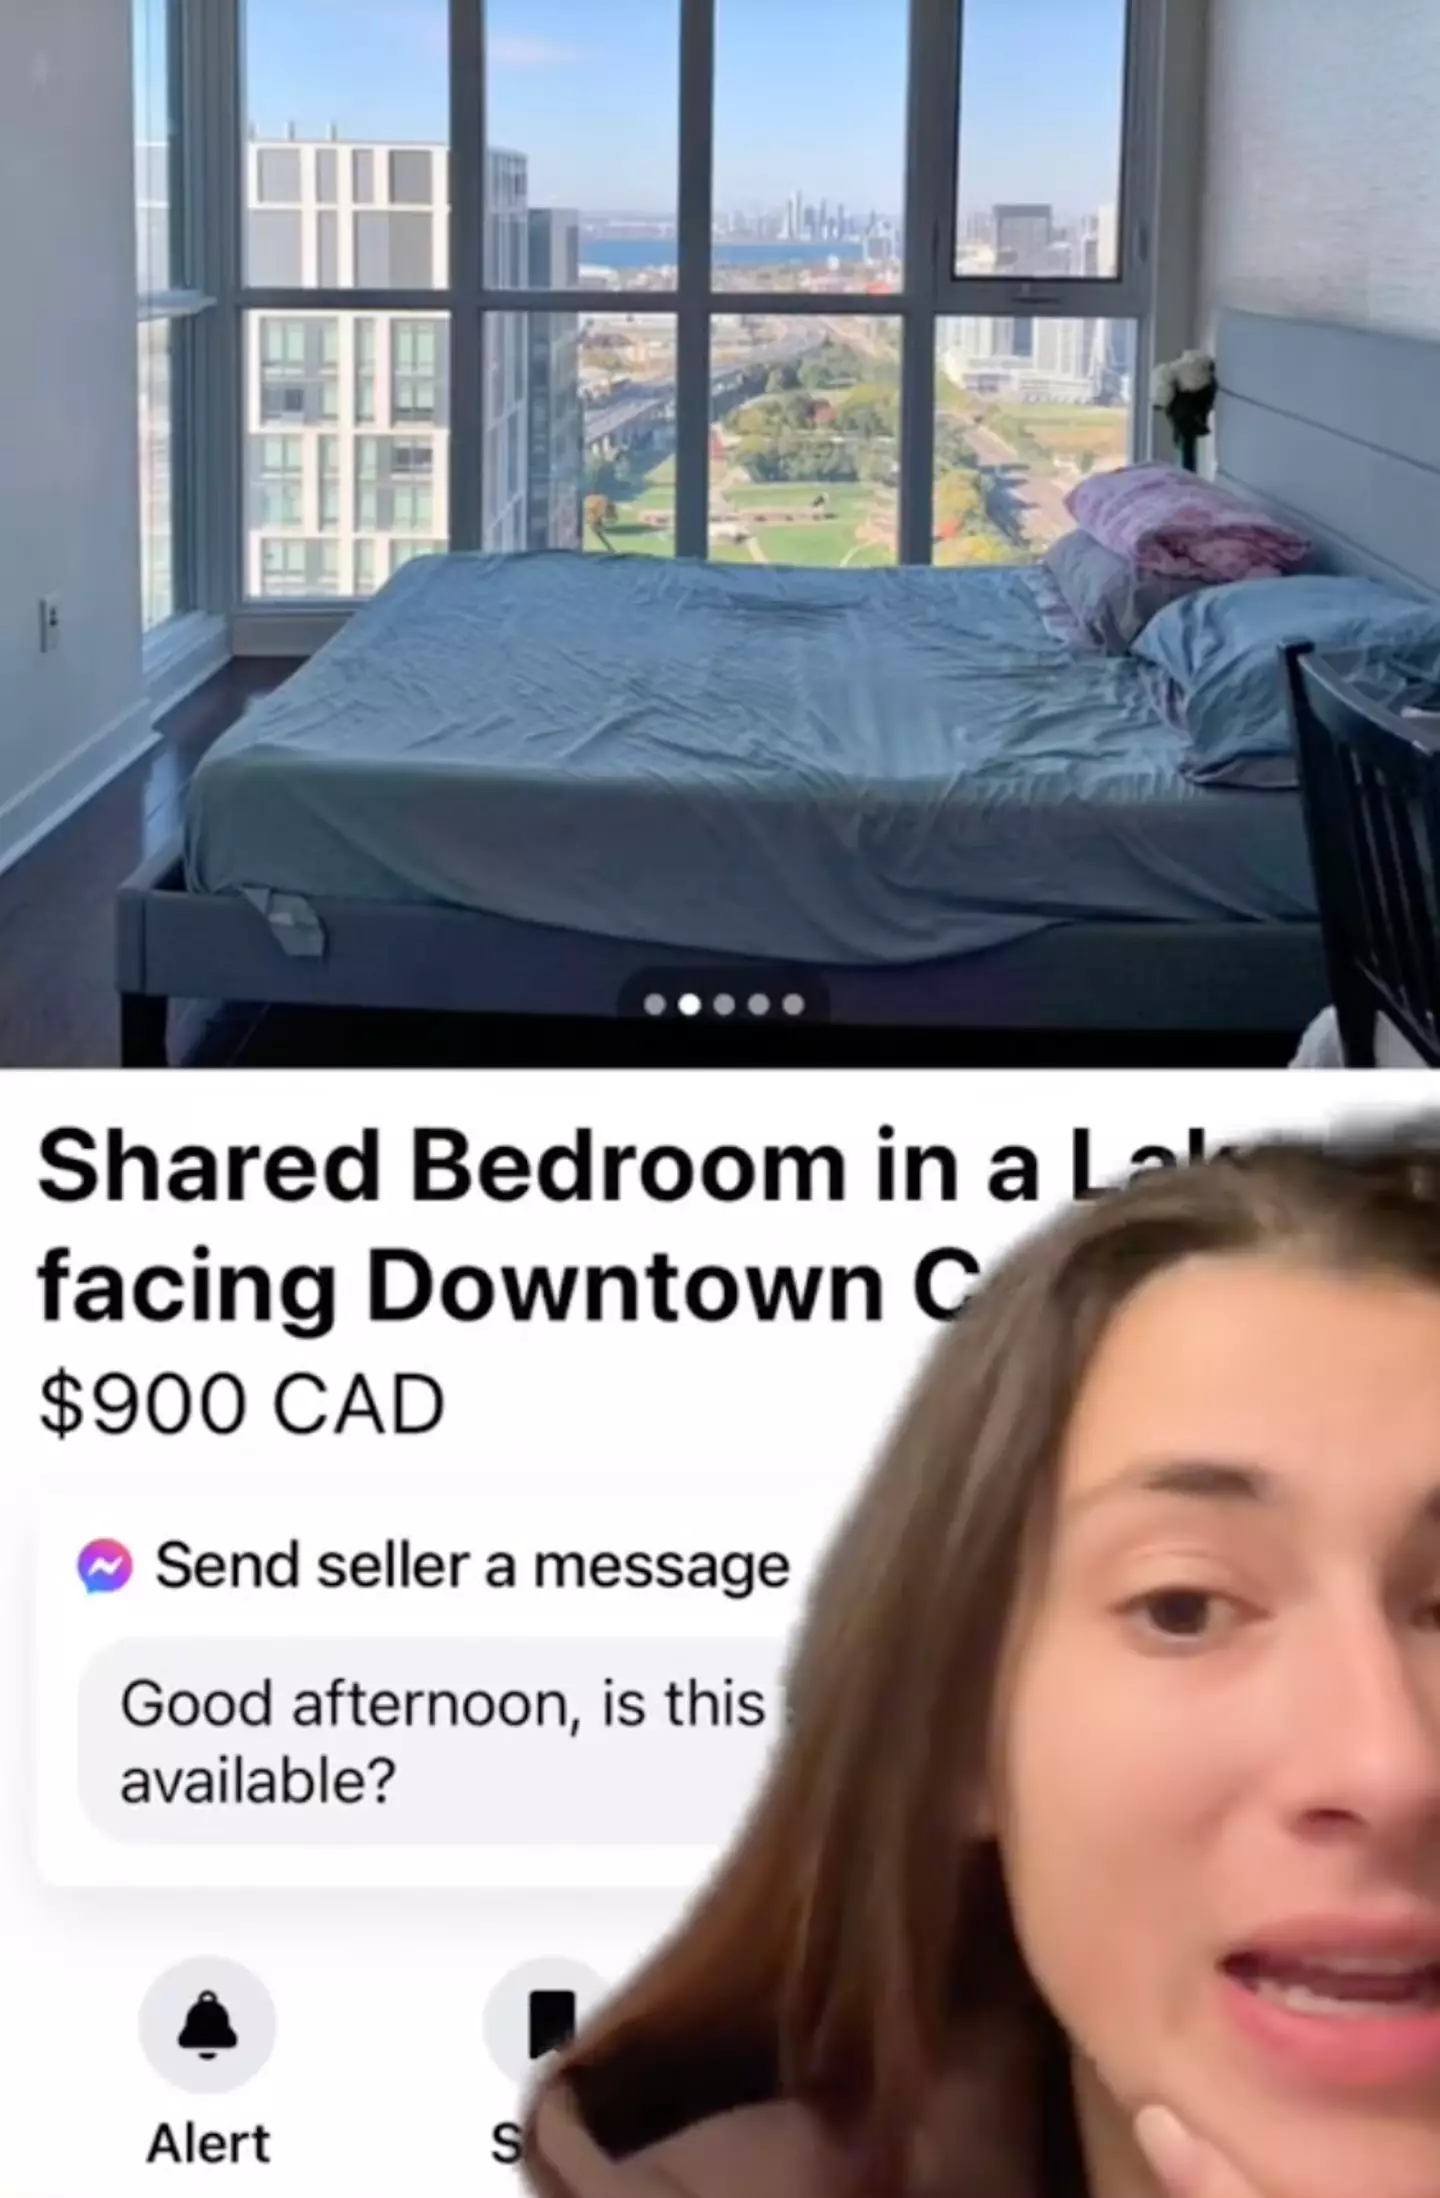 The listing is asking for the tenant to share the bed.